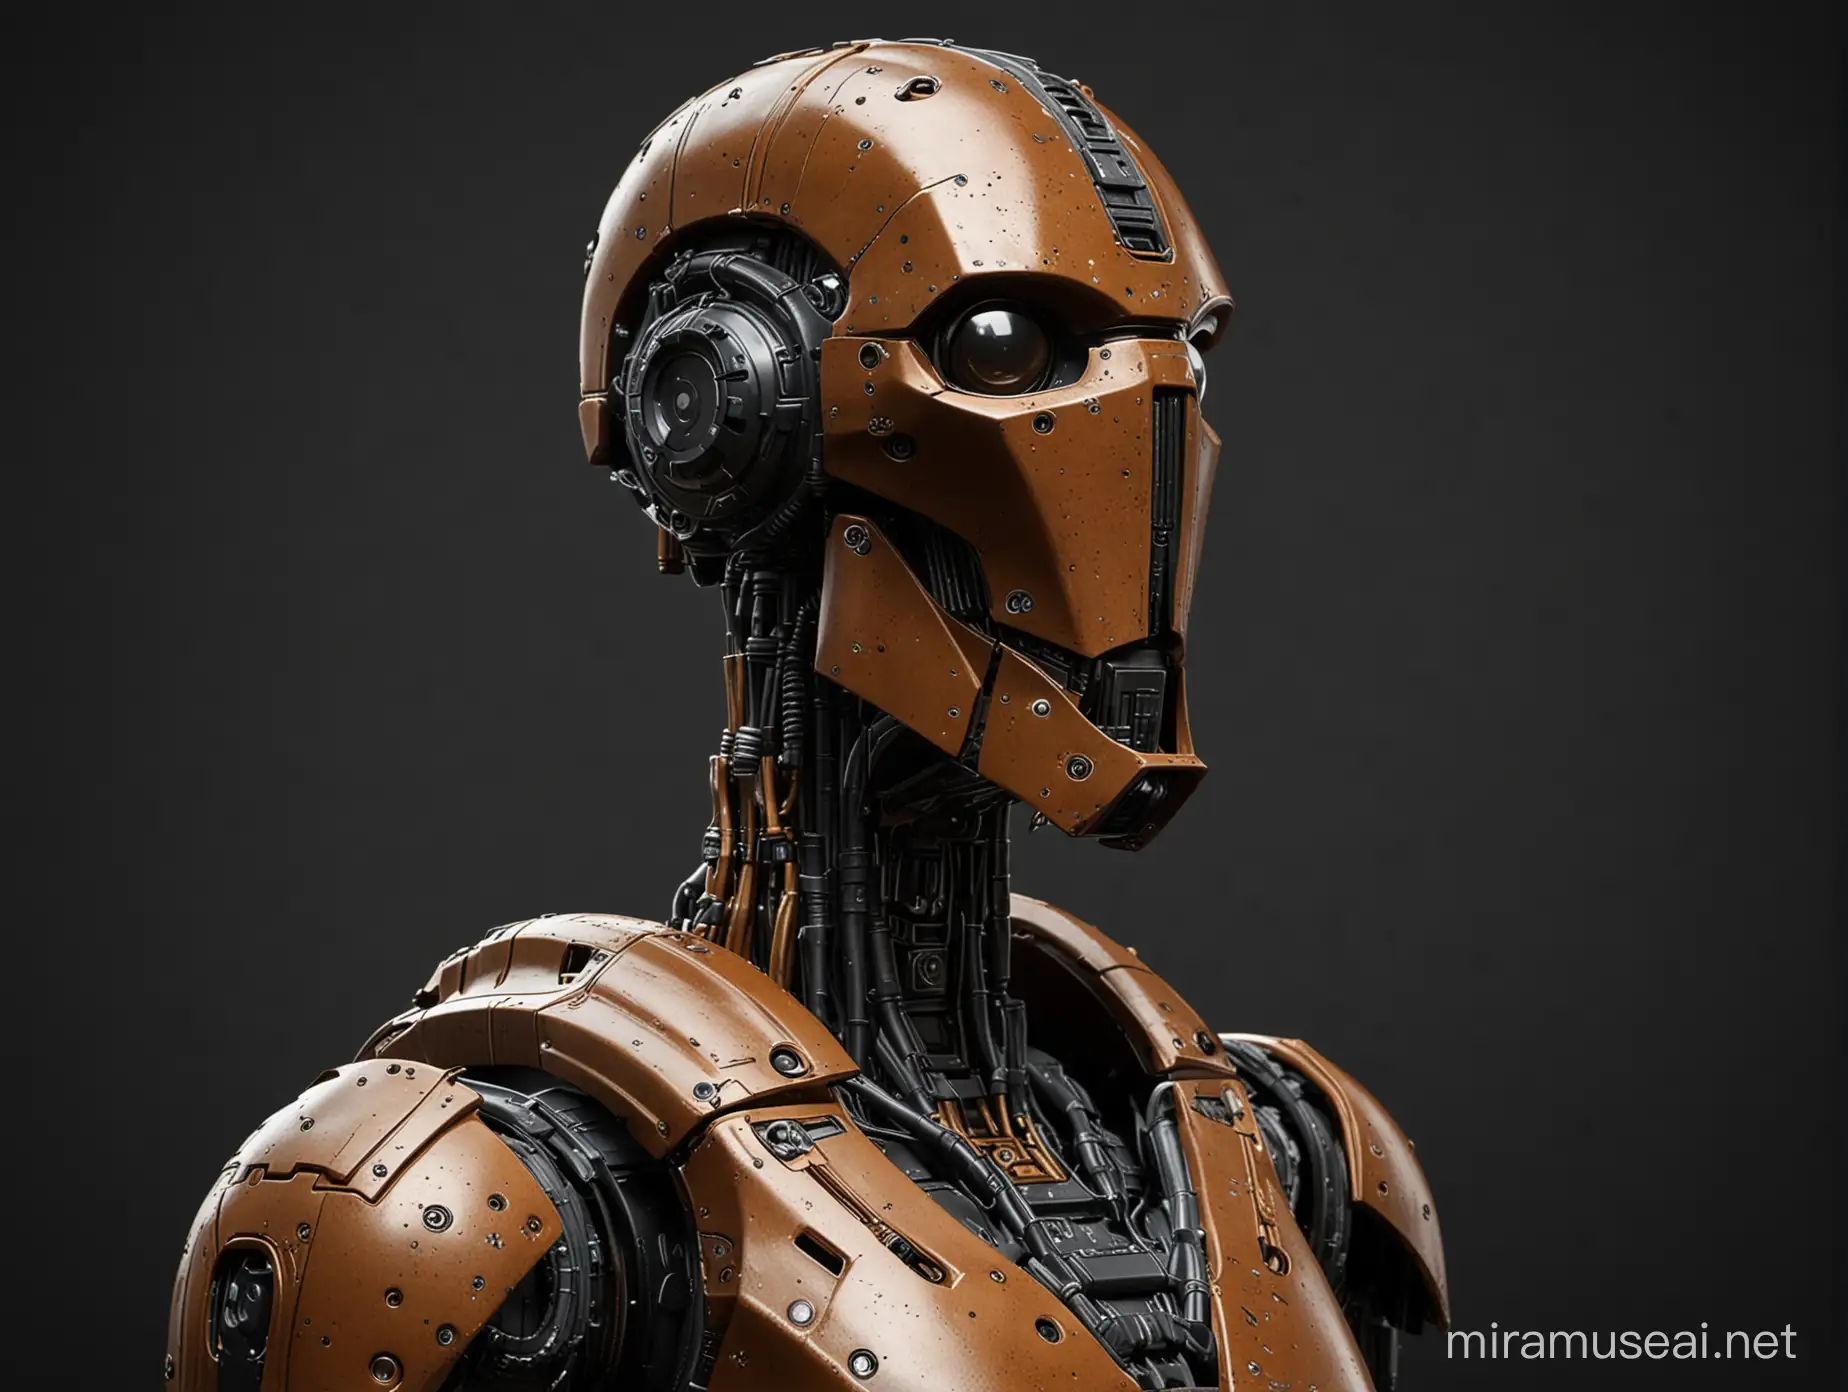 Metallic Bust of a Battle Droid from Star Wars Universe, Droid, robotic, great lighting, 3D, Photorealistic, HD, Detailed, Blank background, Full Black Background, centered object, zoomed in.